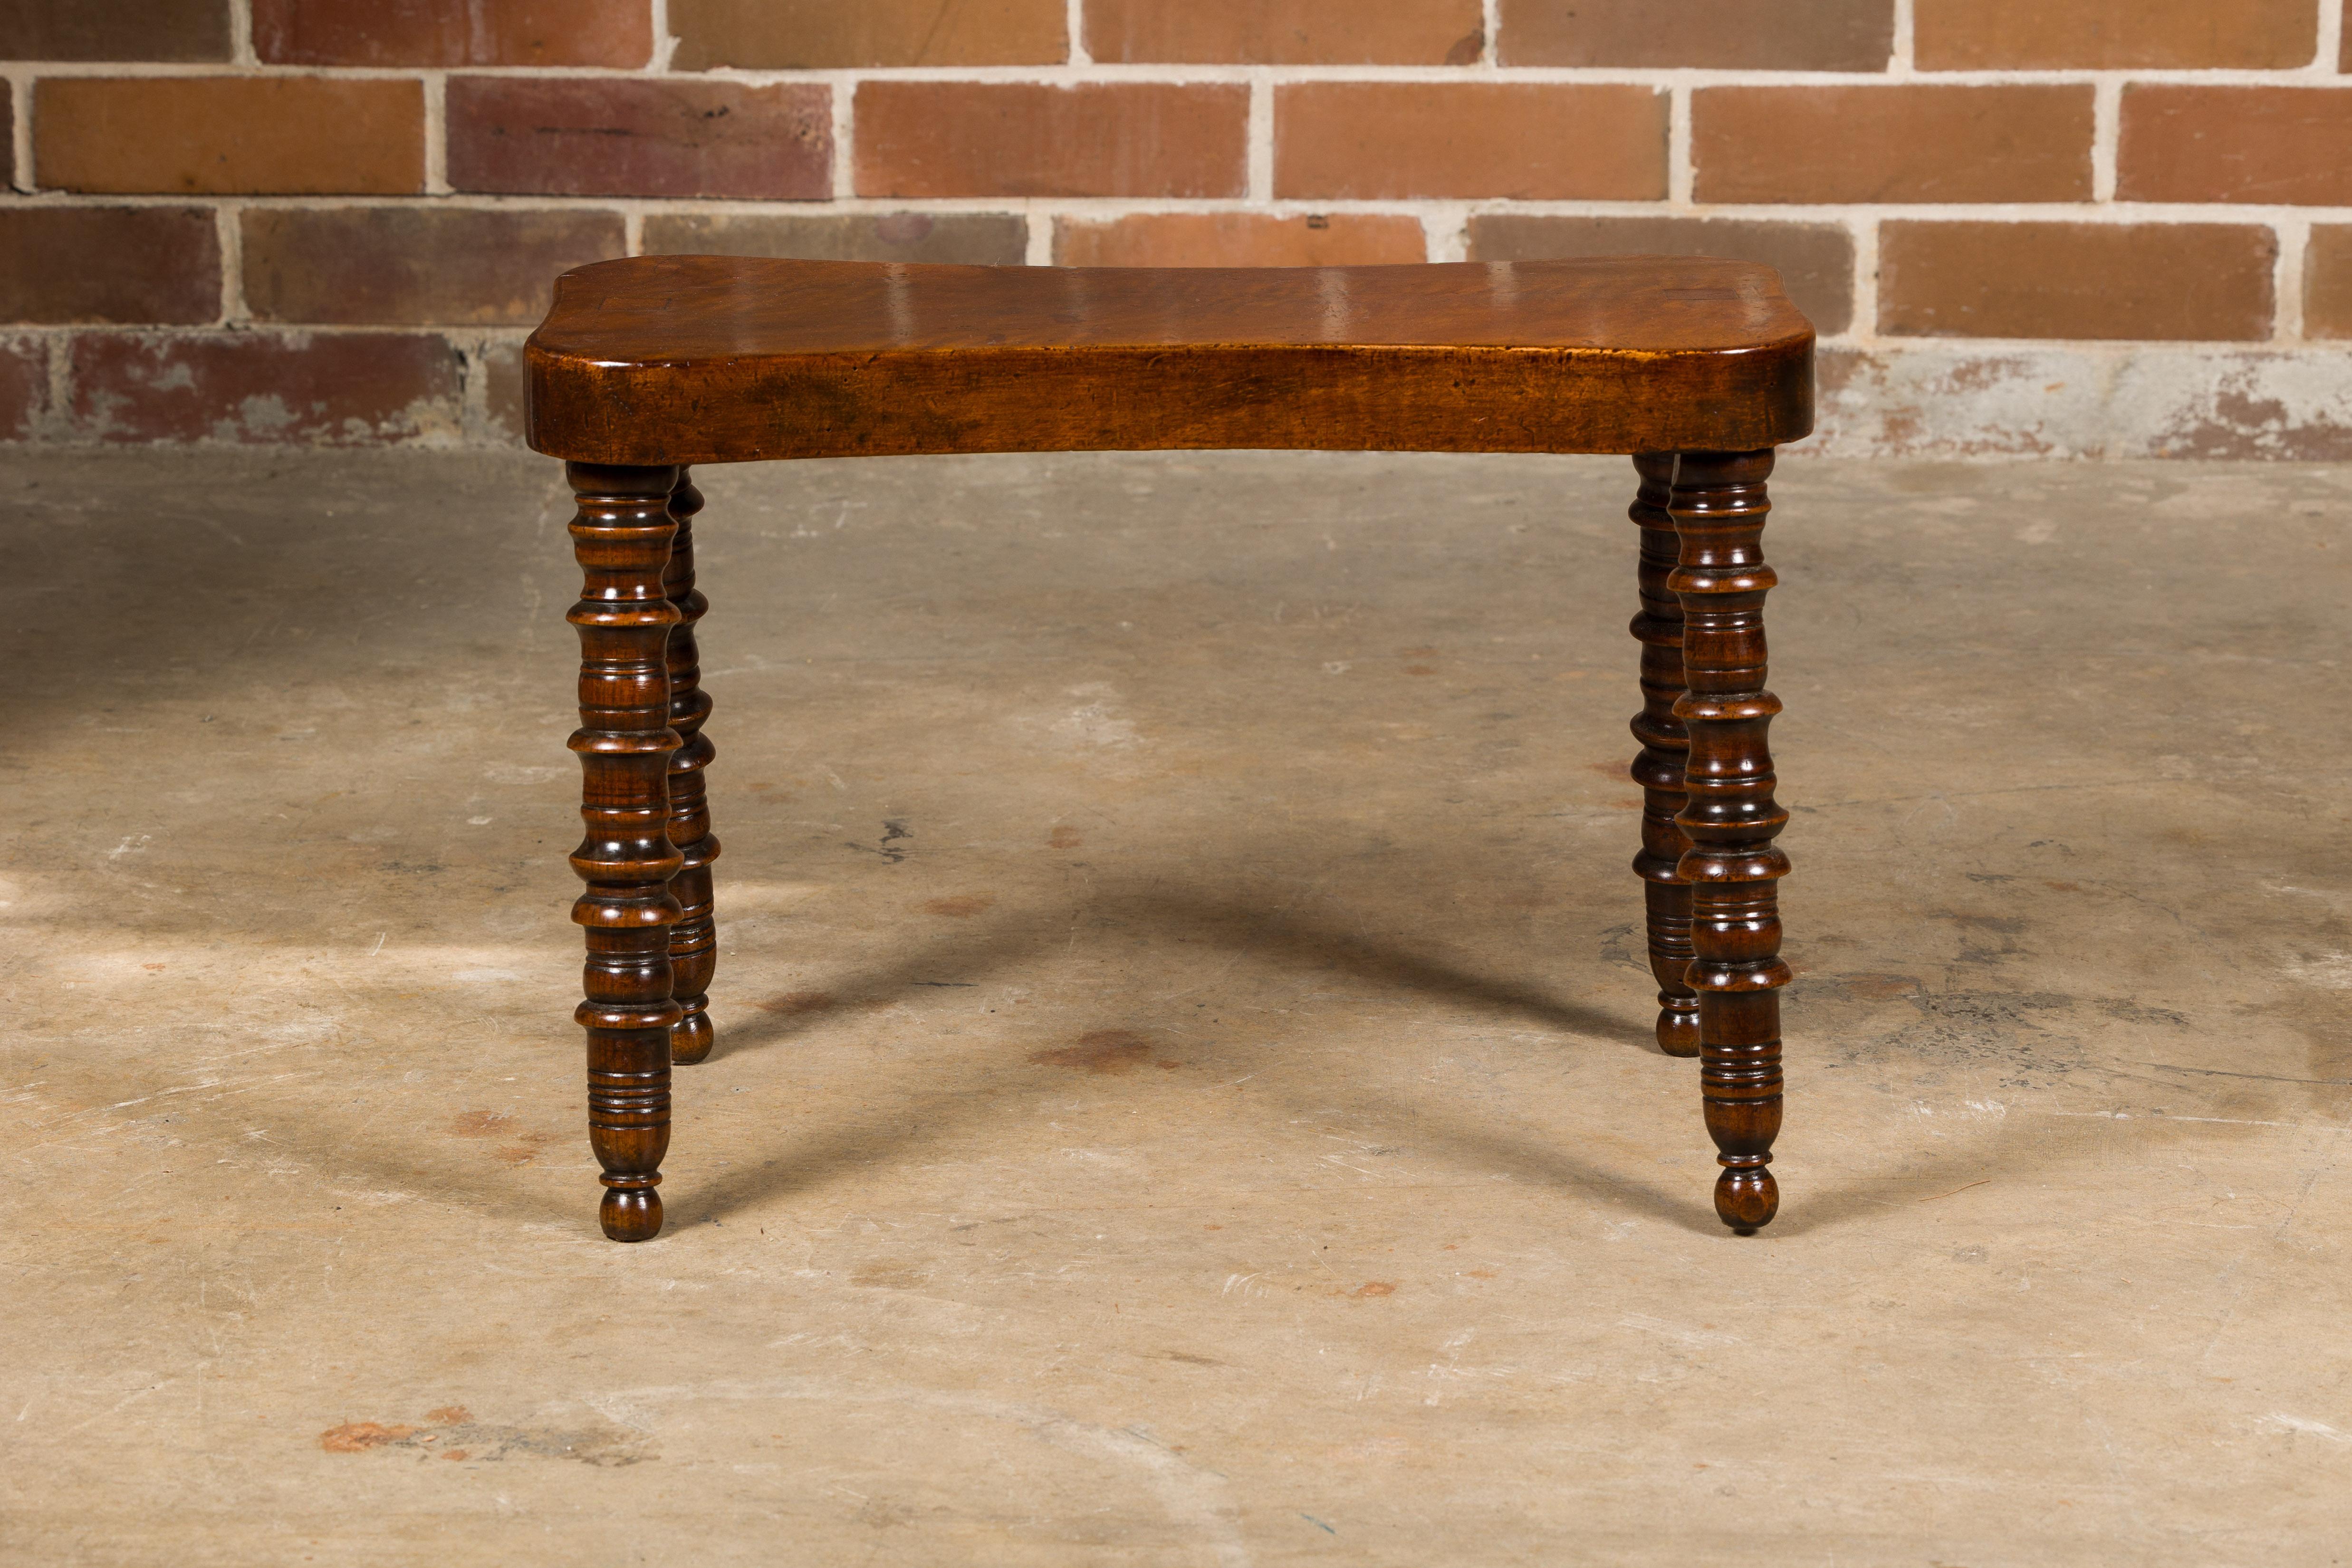 An English walnut stool from the 19th century with turned legs, petite ball feet and curving seat. Discover the timeless charm of this 19th-century English walnut stool, a piece that beautifully captures the essence of Victorian craftsmanship and